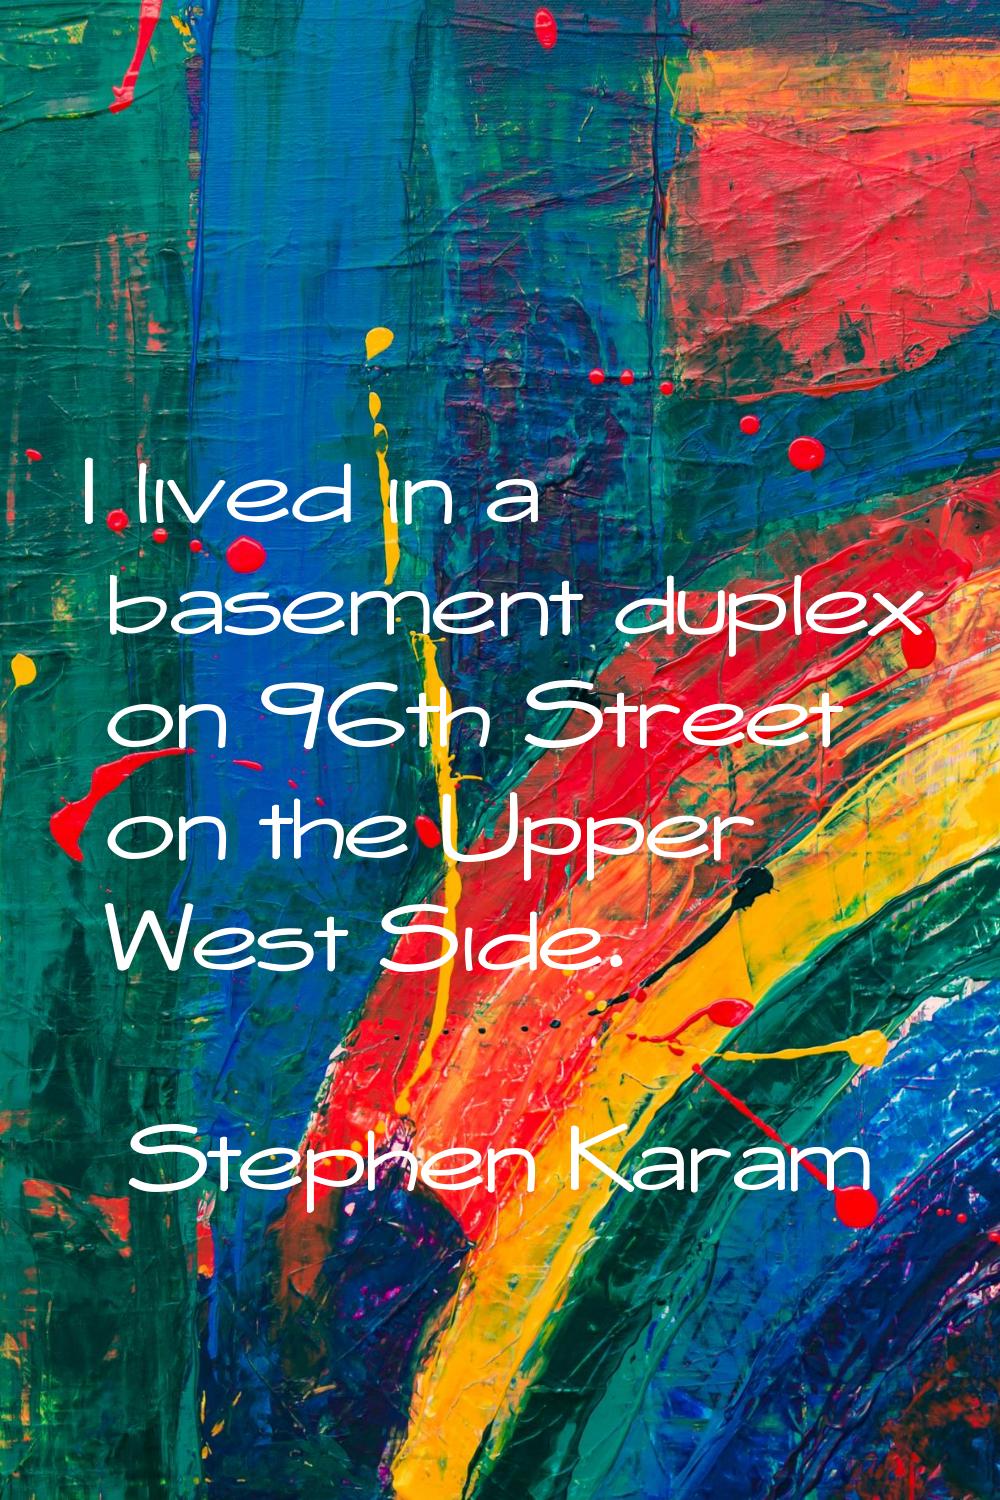 I lived in a basement duplex on 96th Street on the Upper West Side.